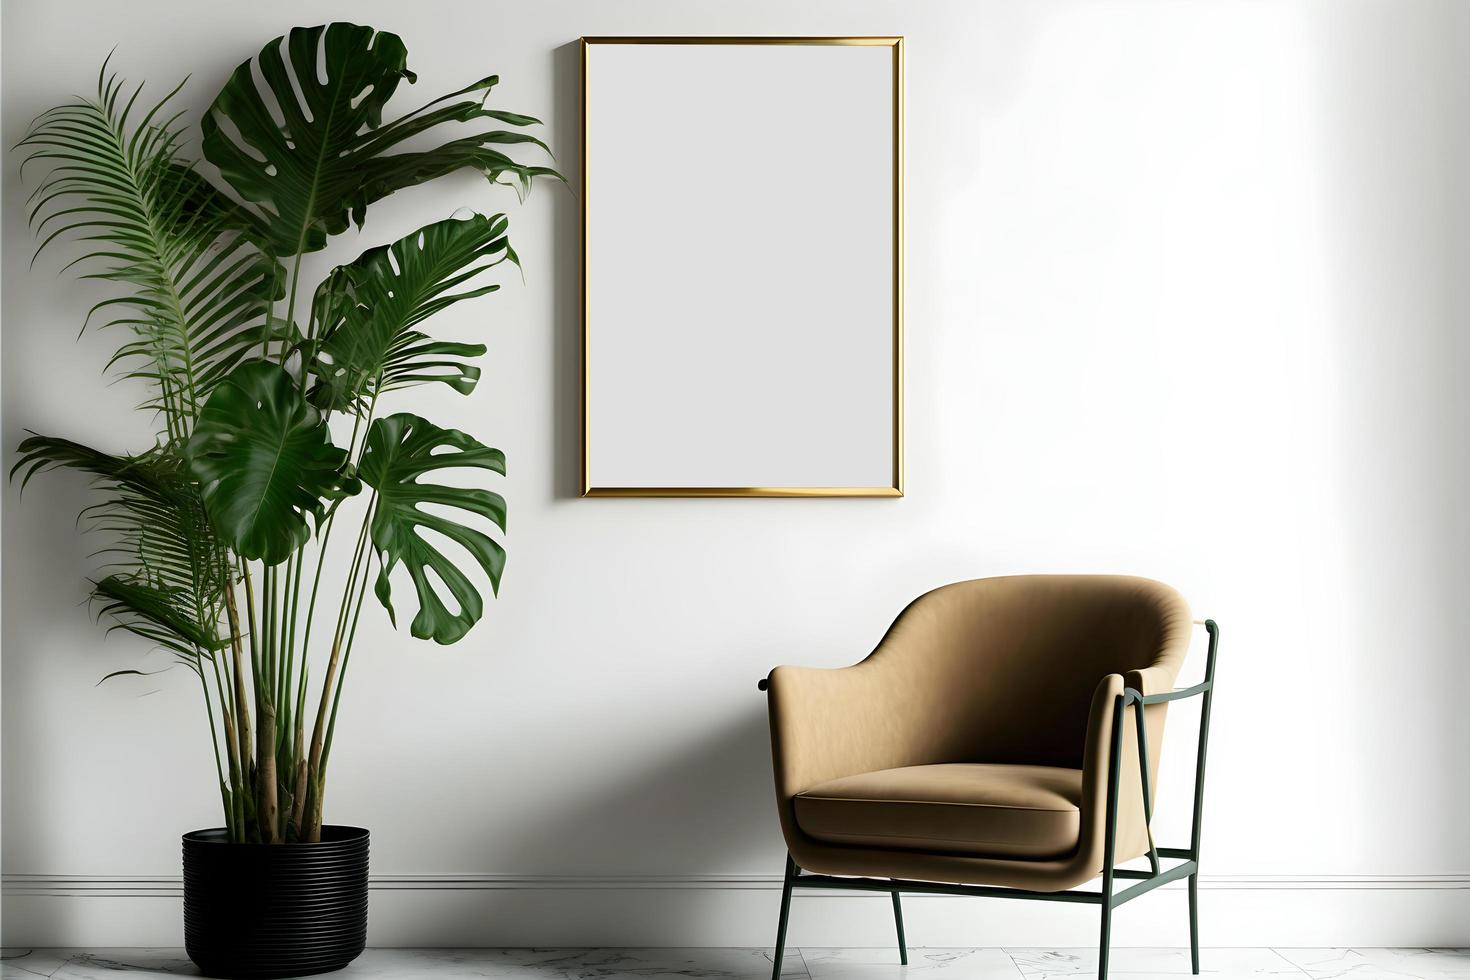 Modern indoor empty picture frame mockup on white wall with chair. White Scandinavian style interior with artwork mock up on wall. empty mock up photo frame with indoor plant in pot